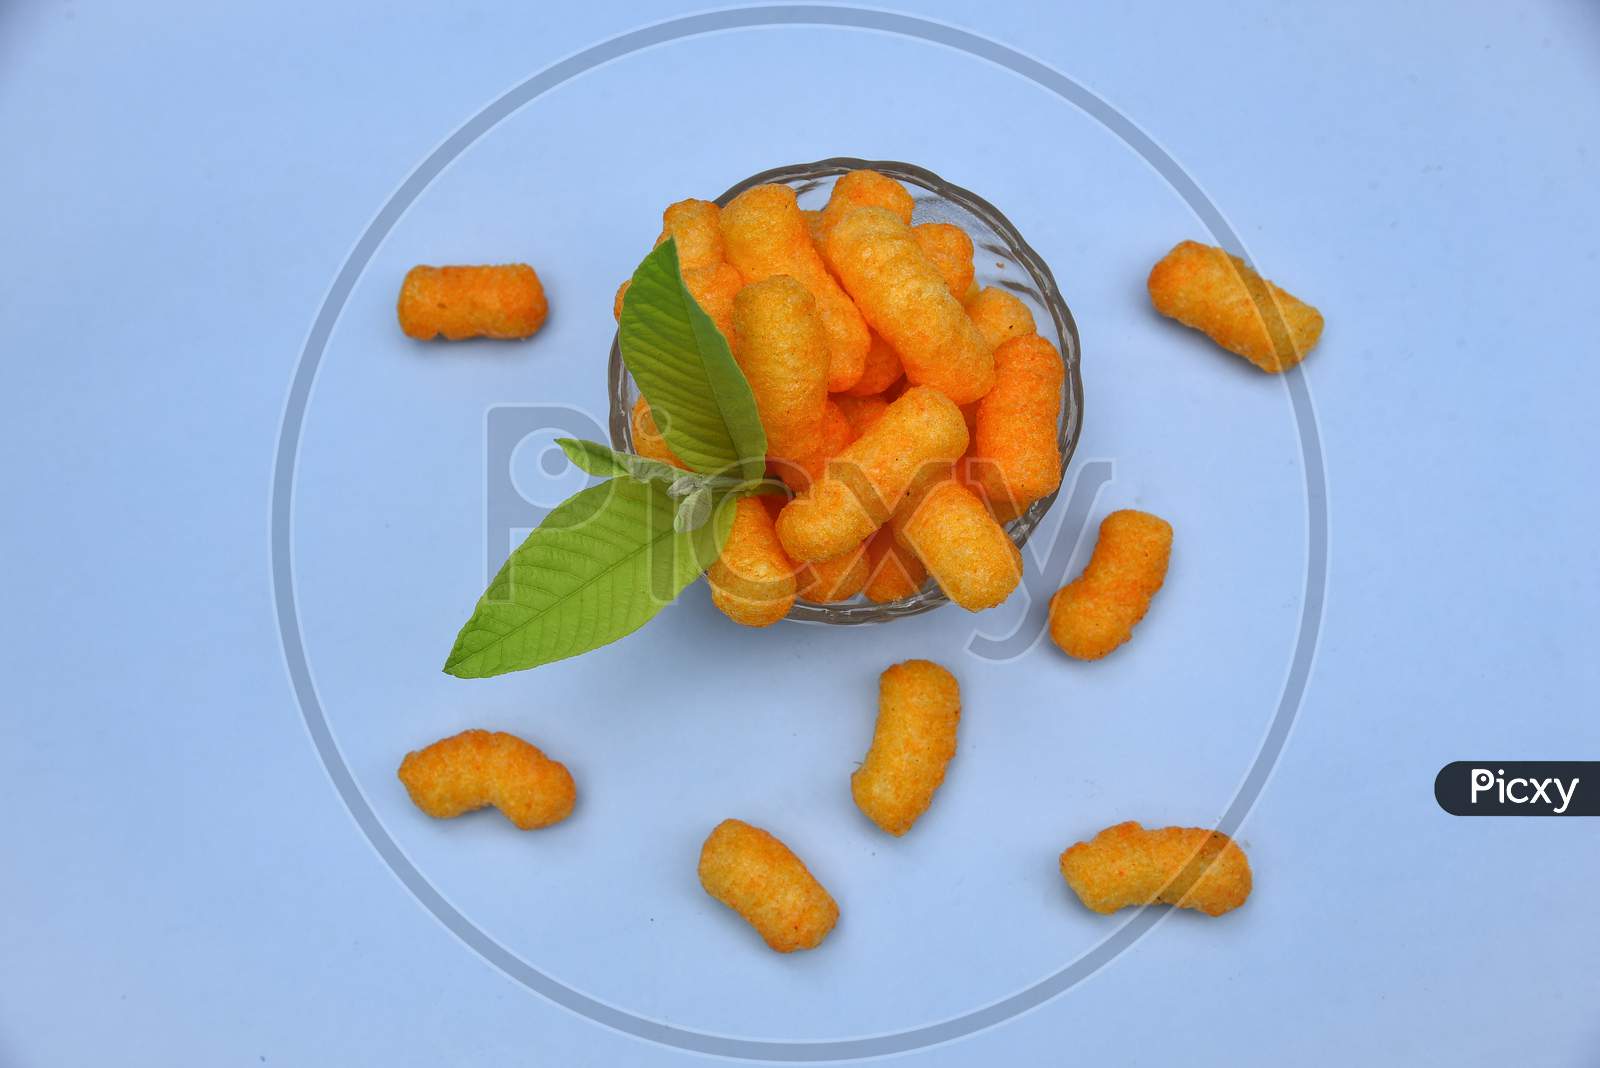 Snacks, crochets or cheese puff pastry on white background.Different kinds of popcorn in bowl